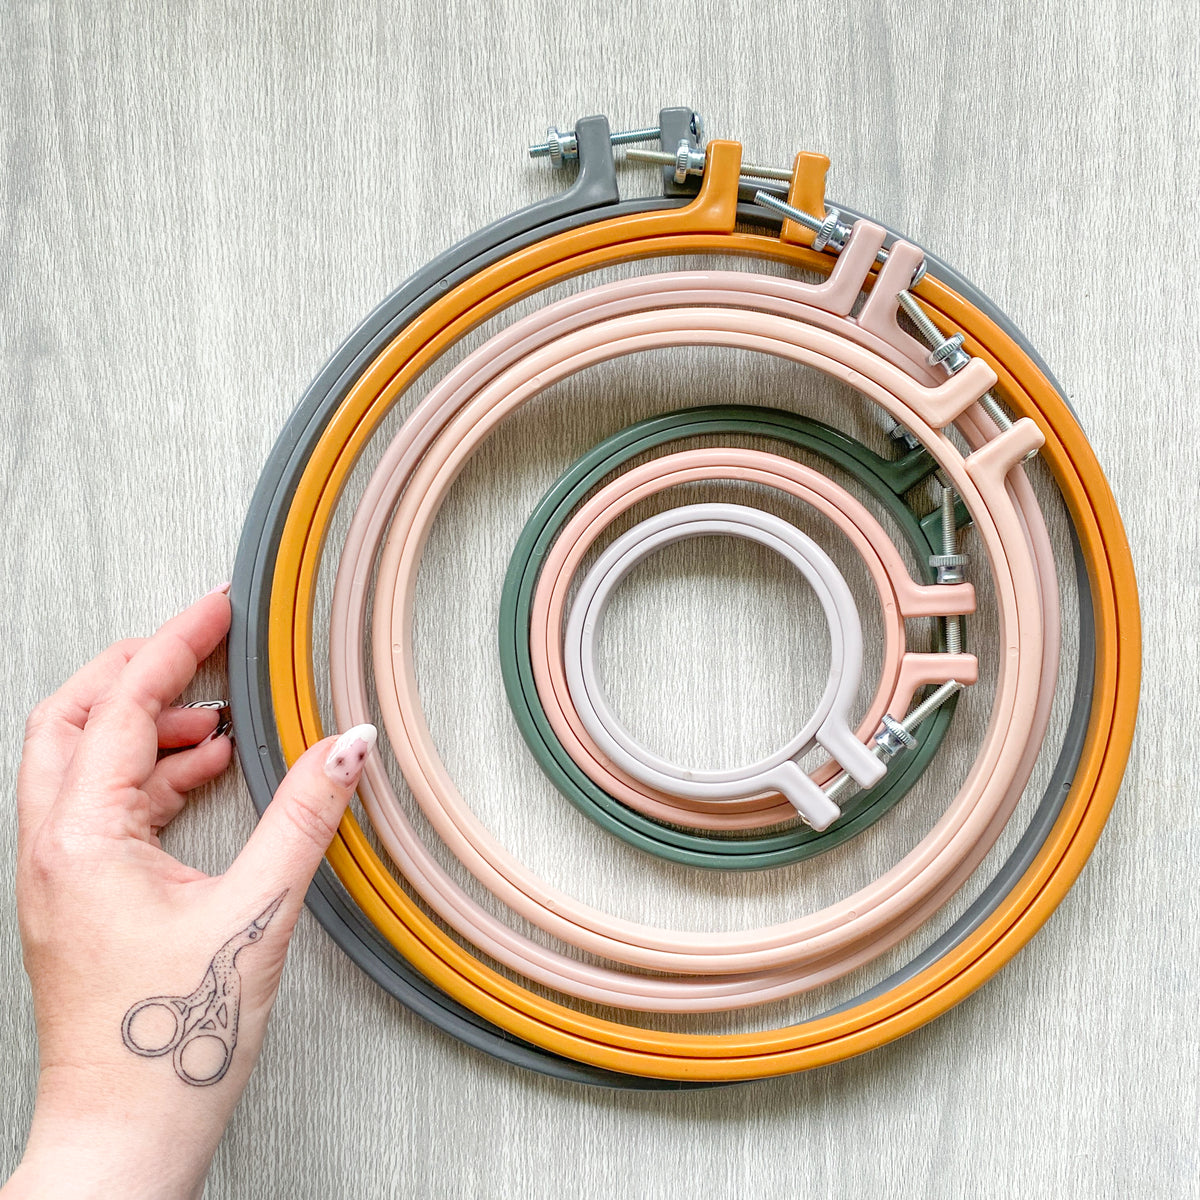 Plastic Embroidery Hoops – The Art of Cross Stitch